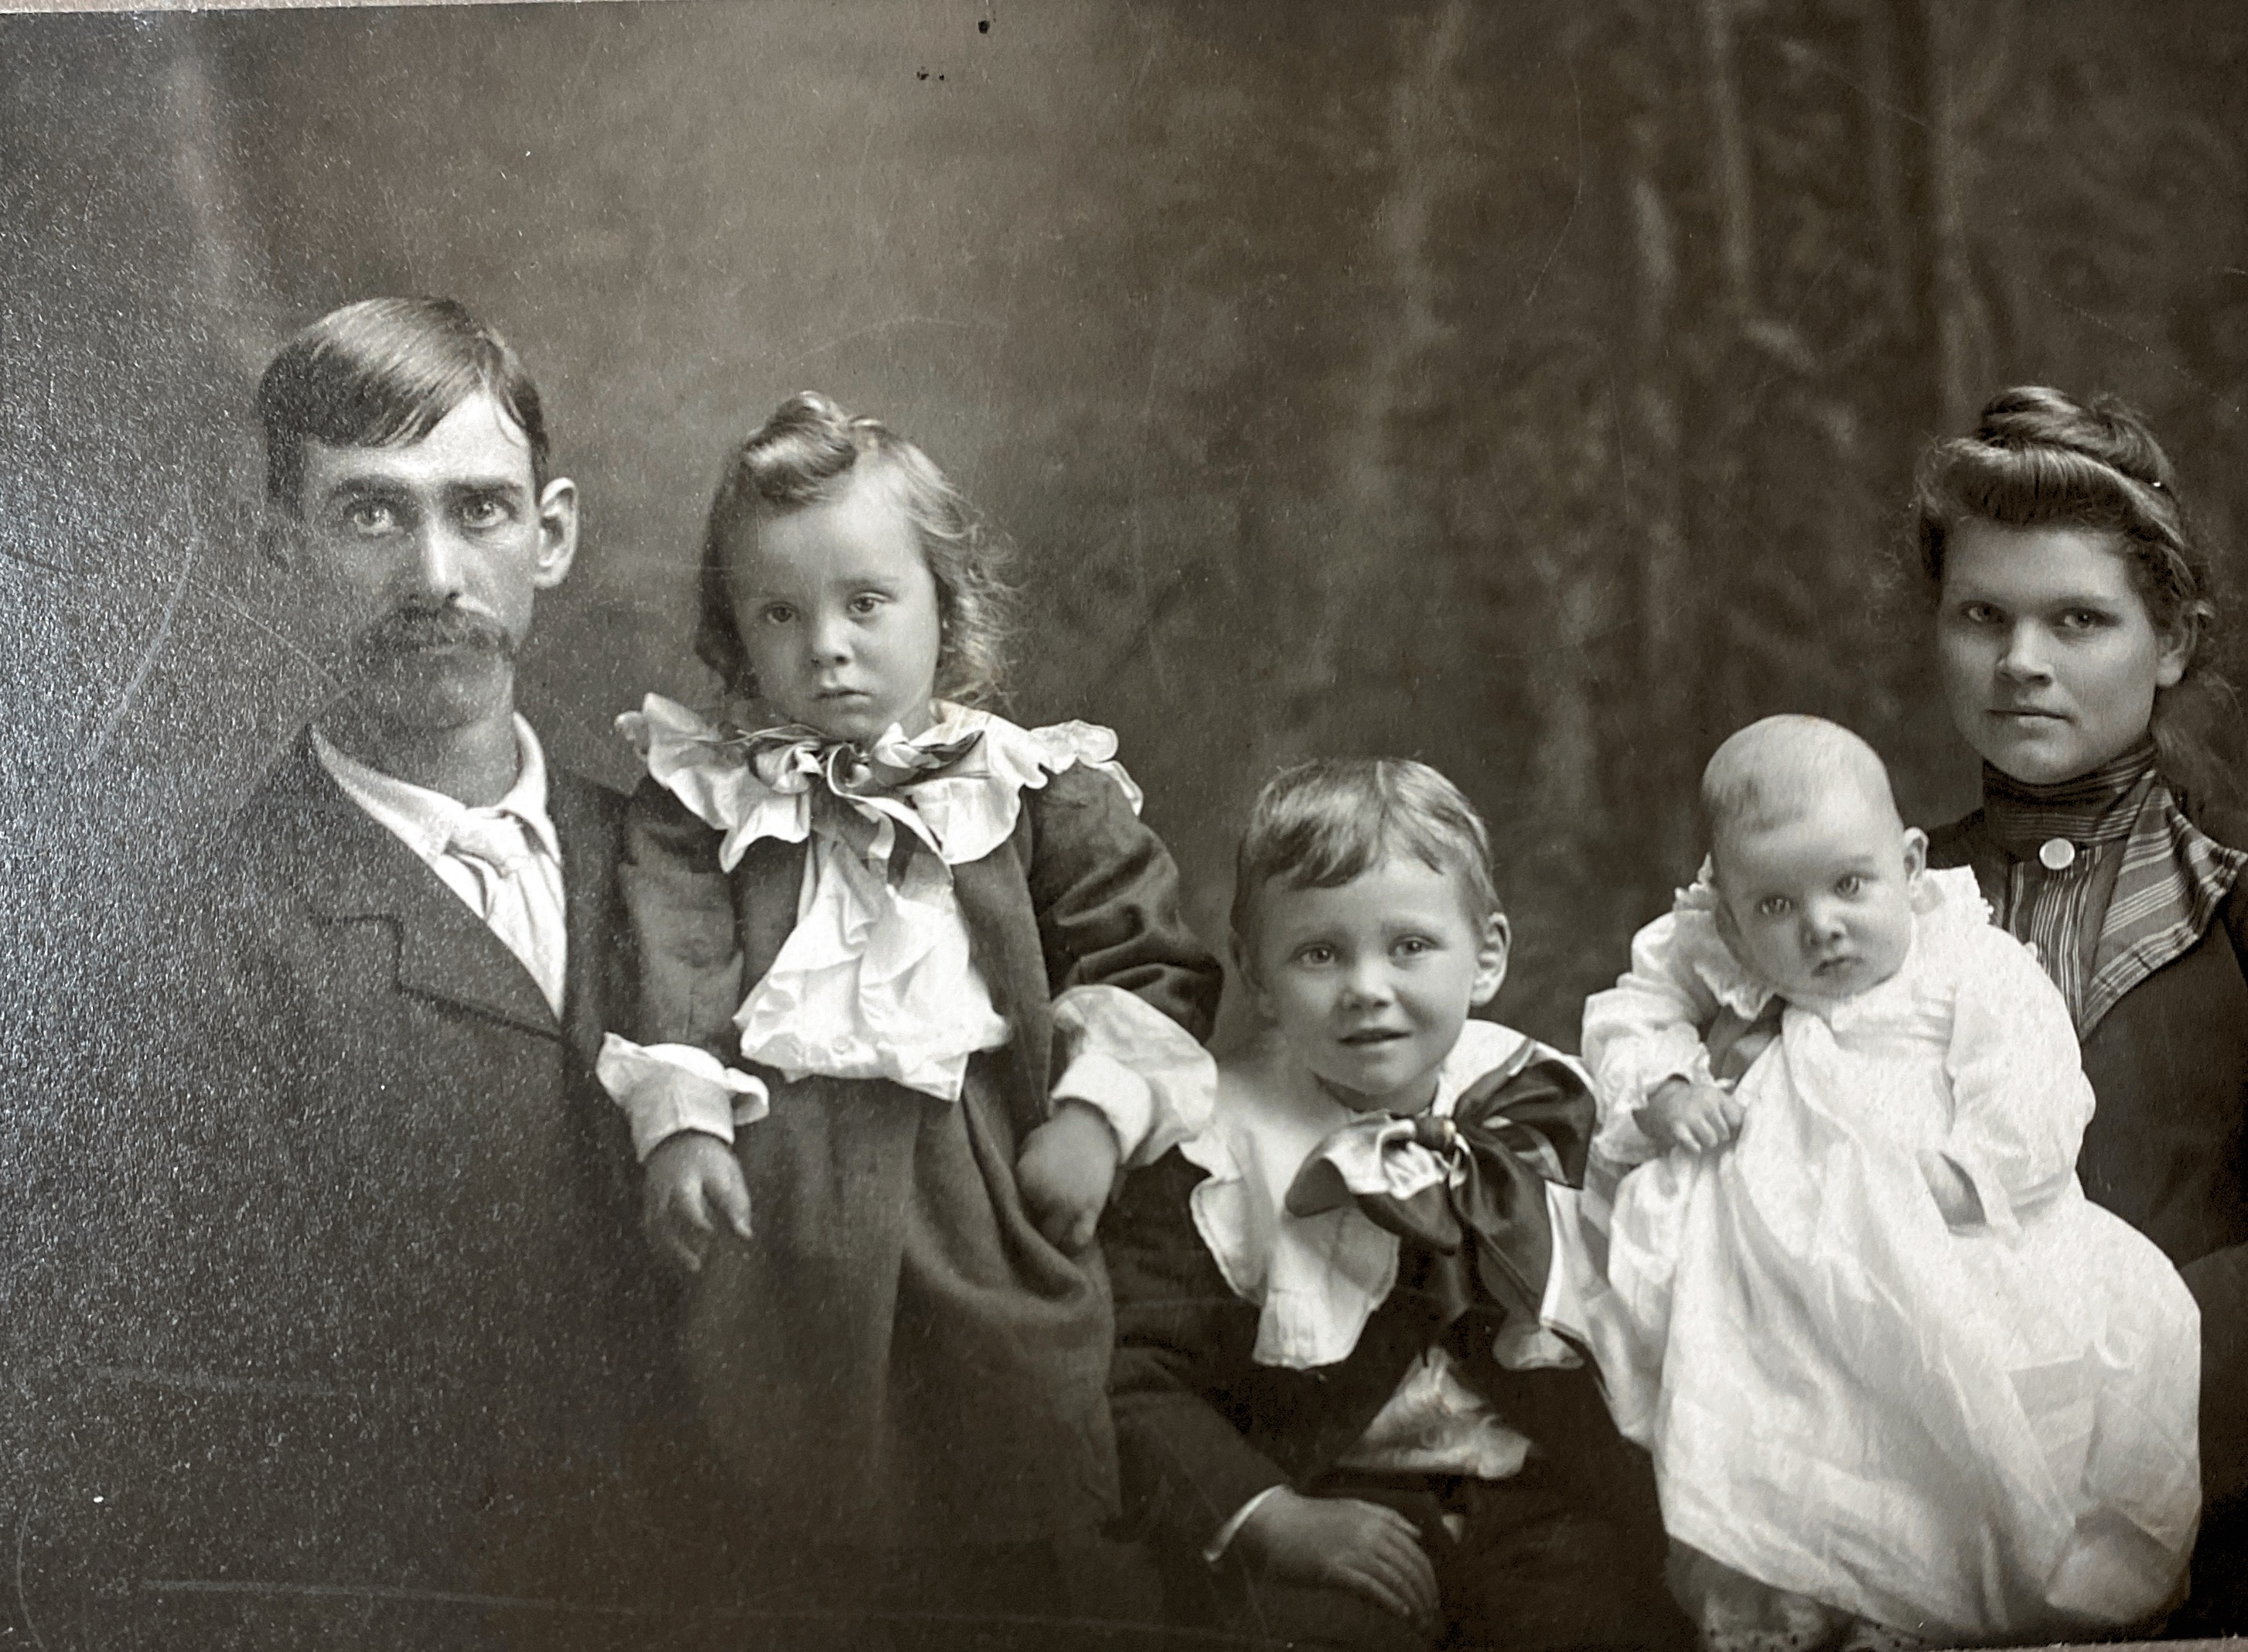 My McKay grandparents with my uncles, Ralph, Harold, and Glenn. Taken sometime before 1908, when my father was born